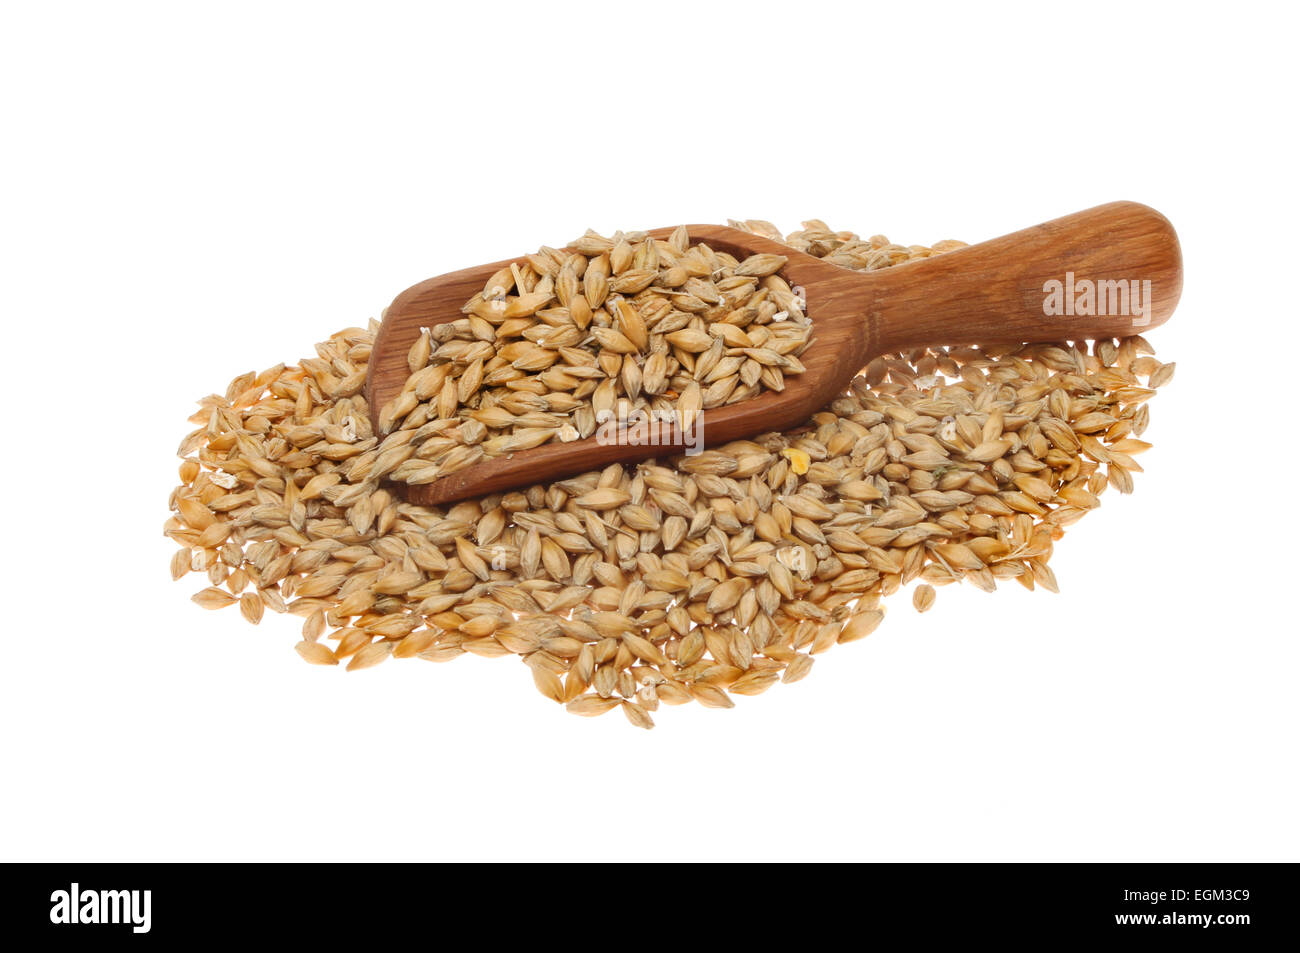 Wooden scoop filled with barley grain on a heap of barley isolated against white Stock Photo